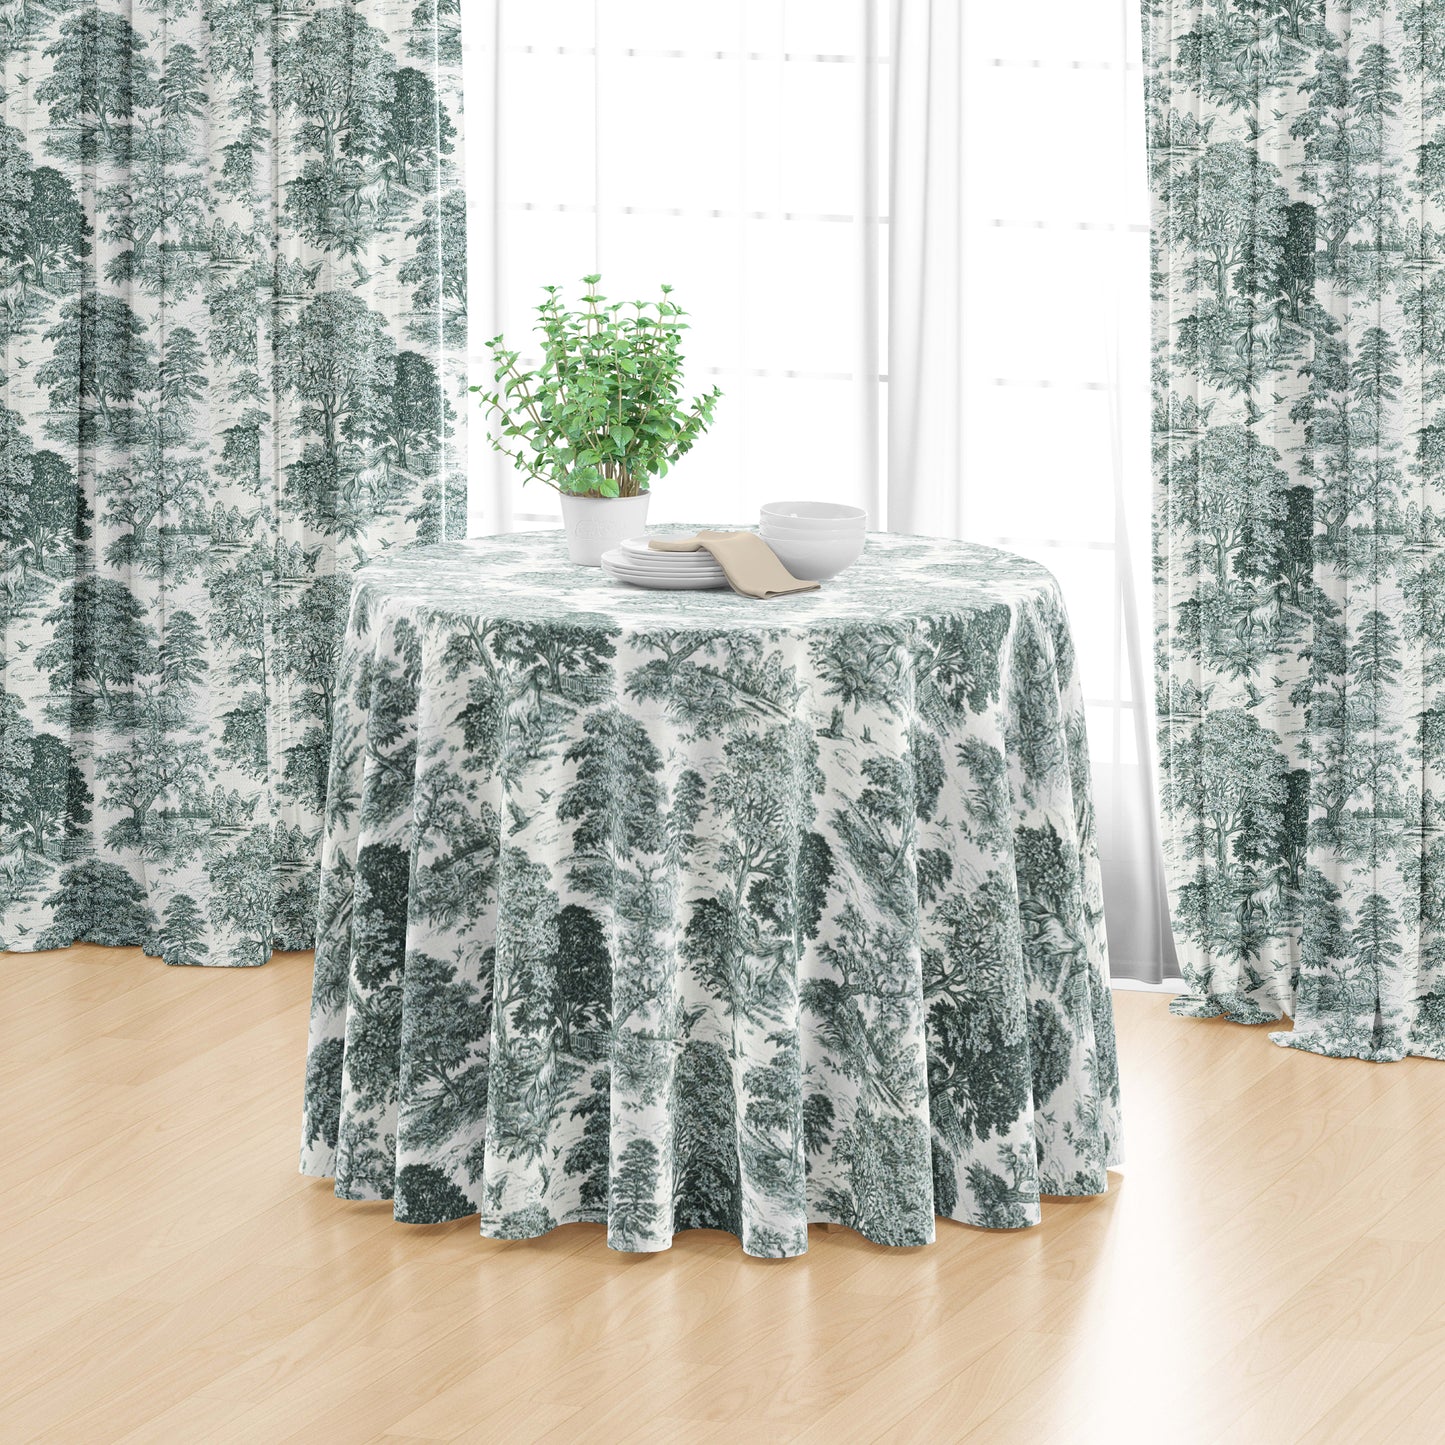 Round Tablecloth in Yellowstone Classic Green Country Toile- Horses, Deer, Dogs- Large Scale